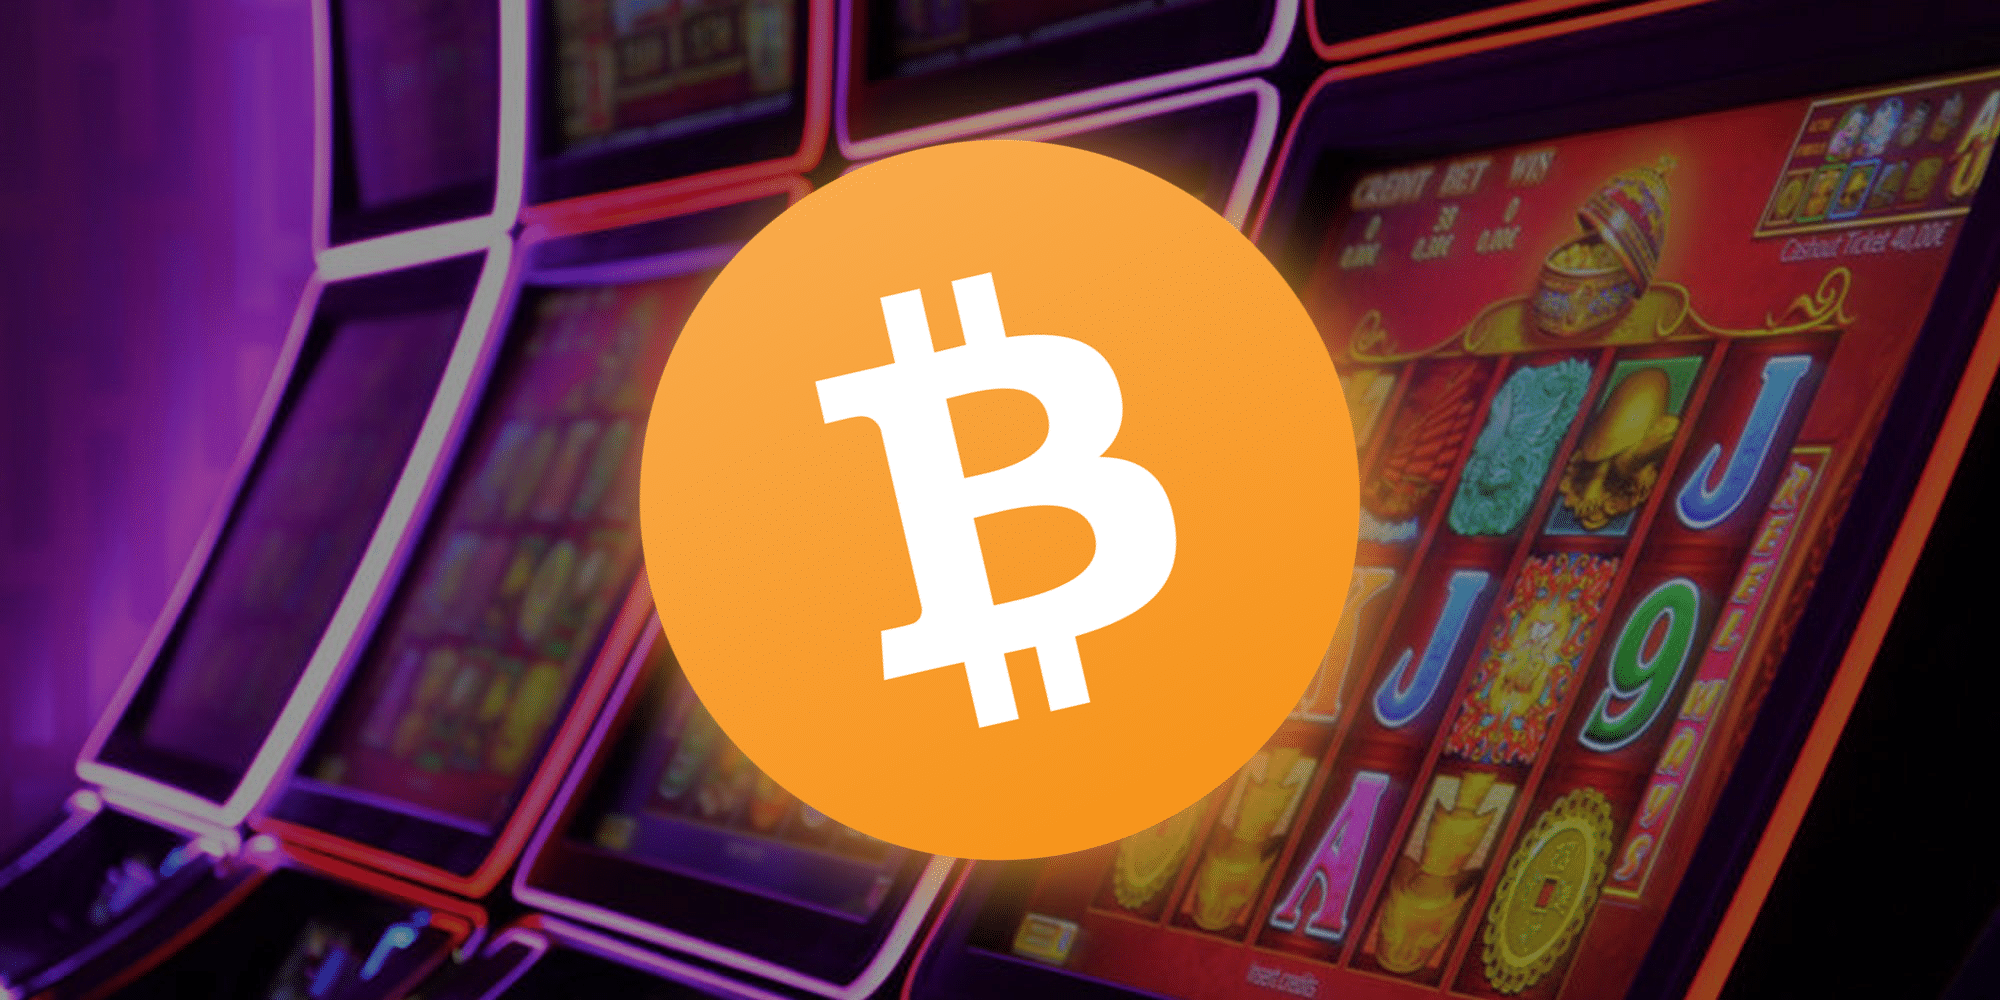 Aspers bitcoin casino online review